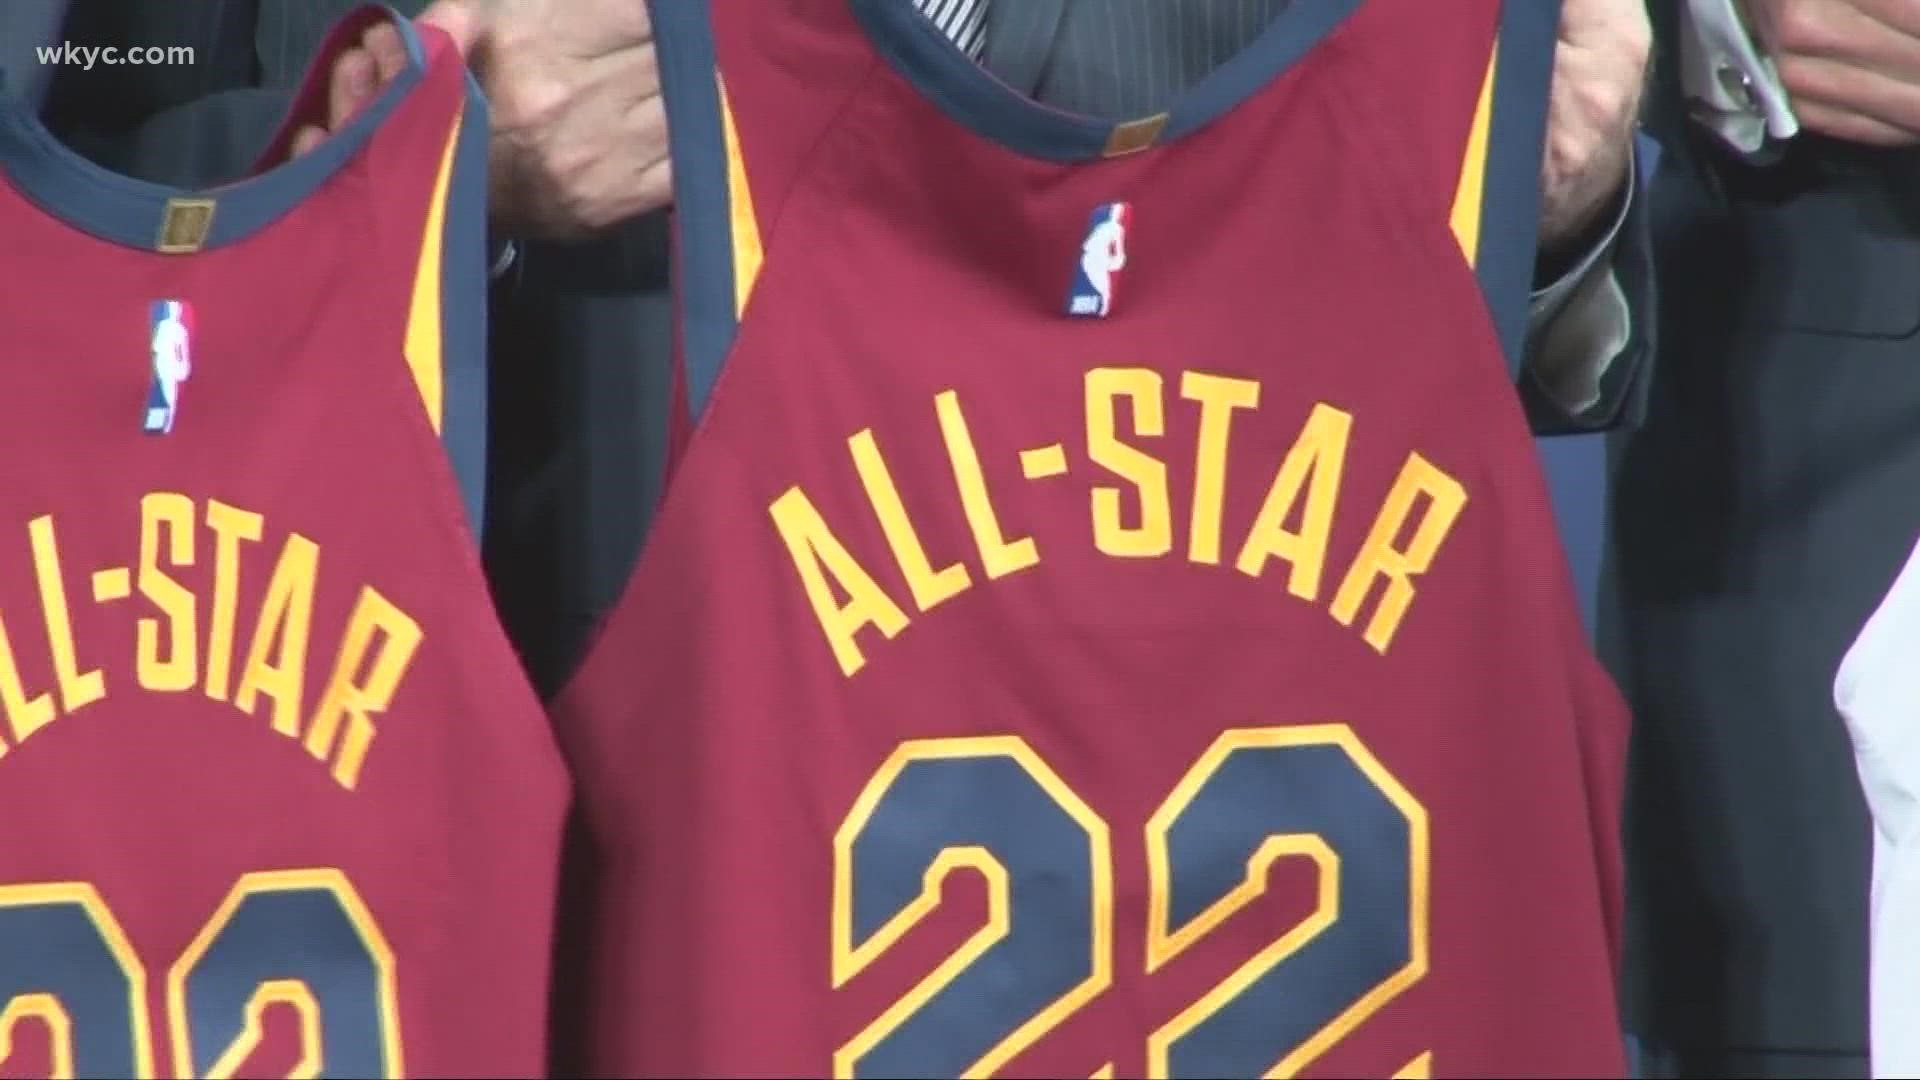 It's a big weekend in Cleveland! Here's where some of the action is taking place for the NBA All-Star Game.